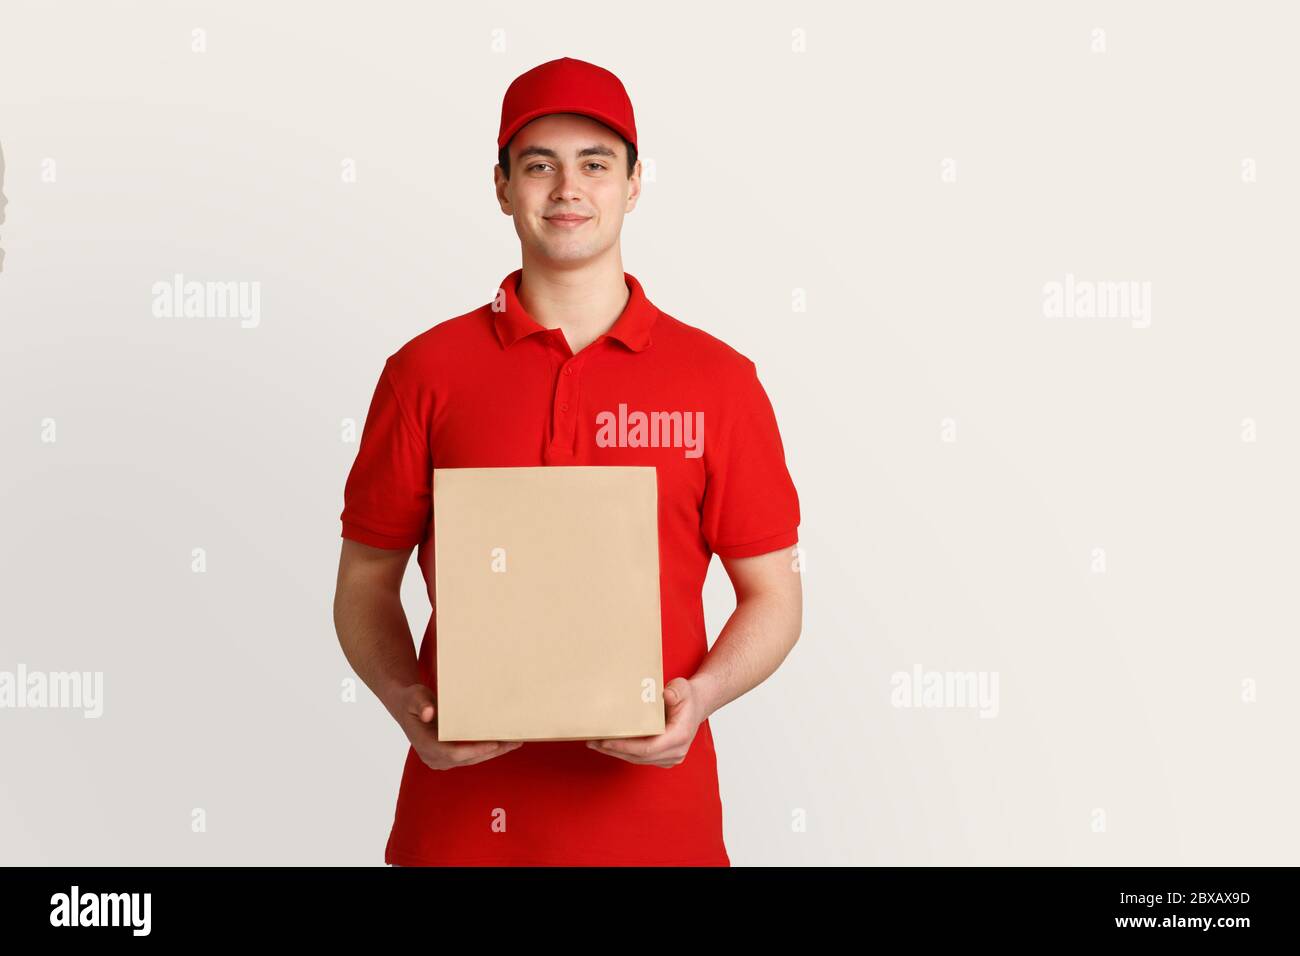 Courier job is deliver package to customer. Deliveryman holds cardboard box Stock Photo